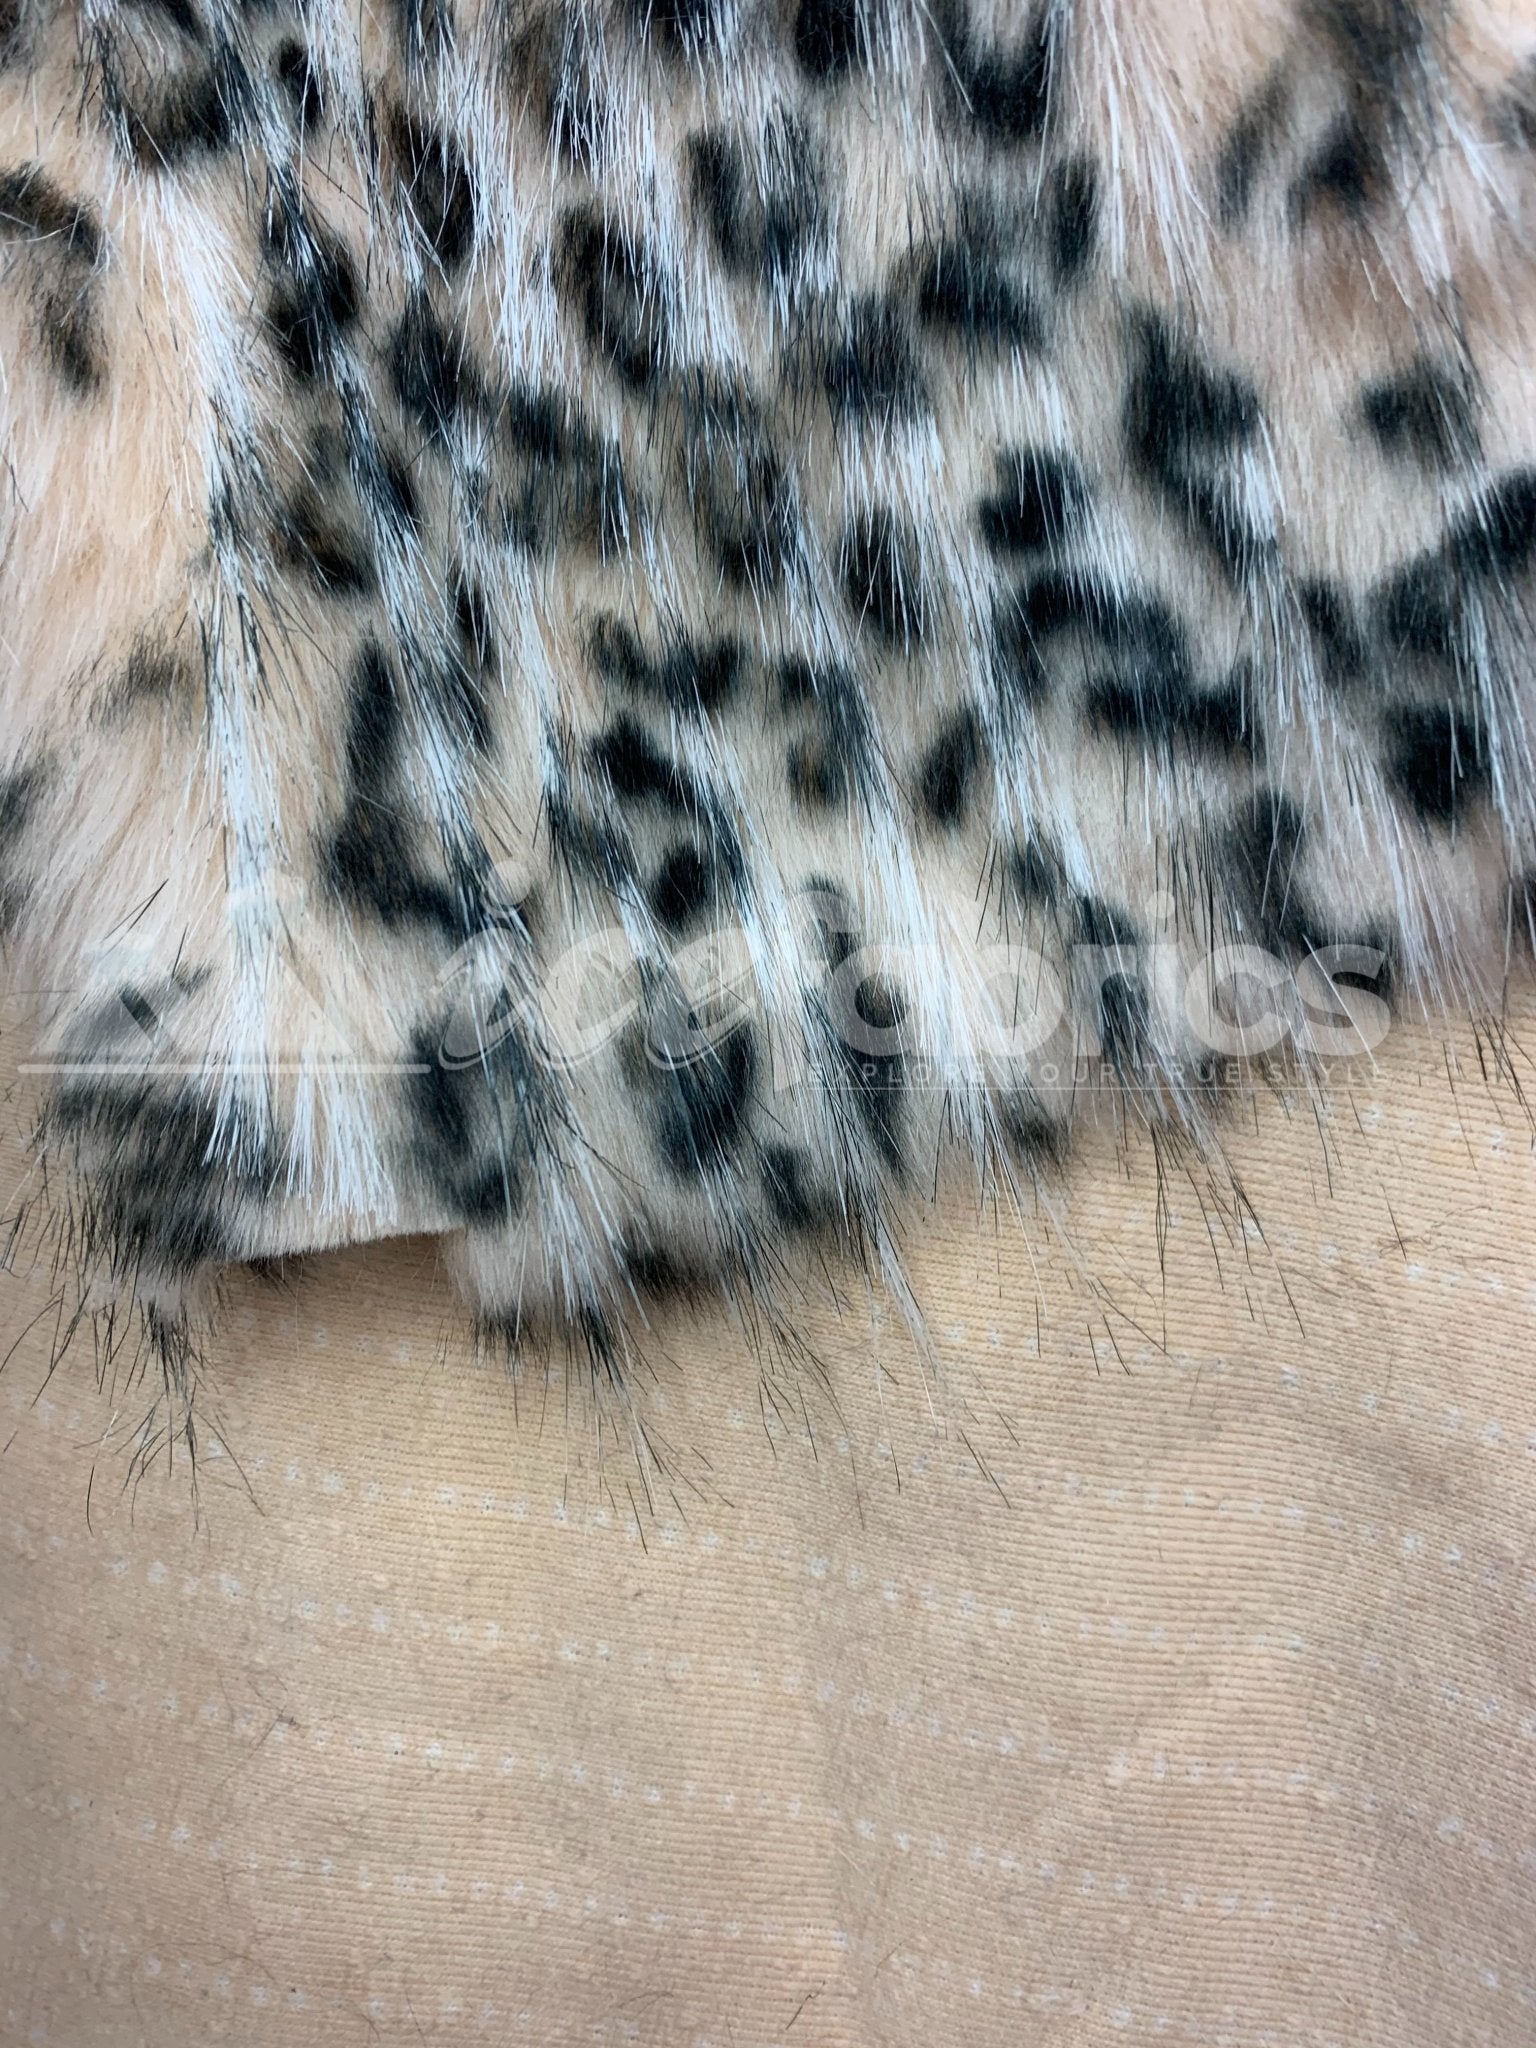 Long Pile Fake Animal Leopard Faux Fur Fabric By The Yard | Fur MaterialICEFABRICICE FABRICSBy The Yard (60 inches Wide)Long Pile Fake Animal Leopard Faux Fur Fabric By The Yard | Fur Material ICEFABRIC